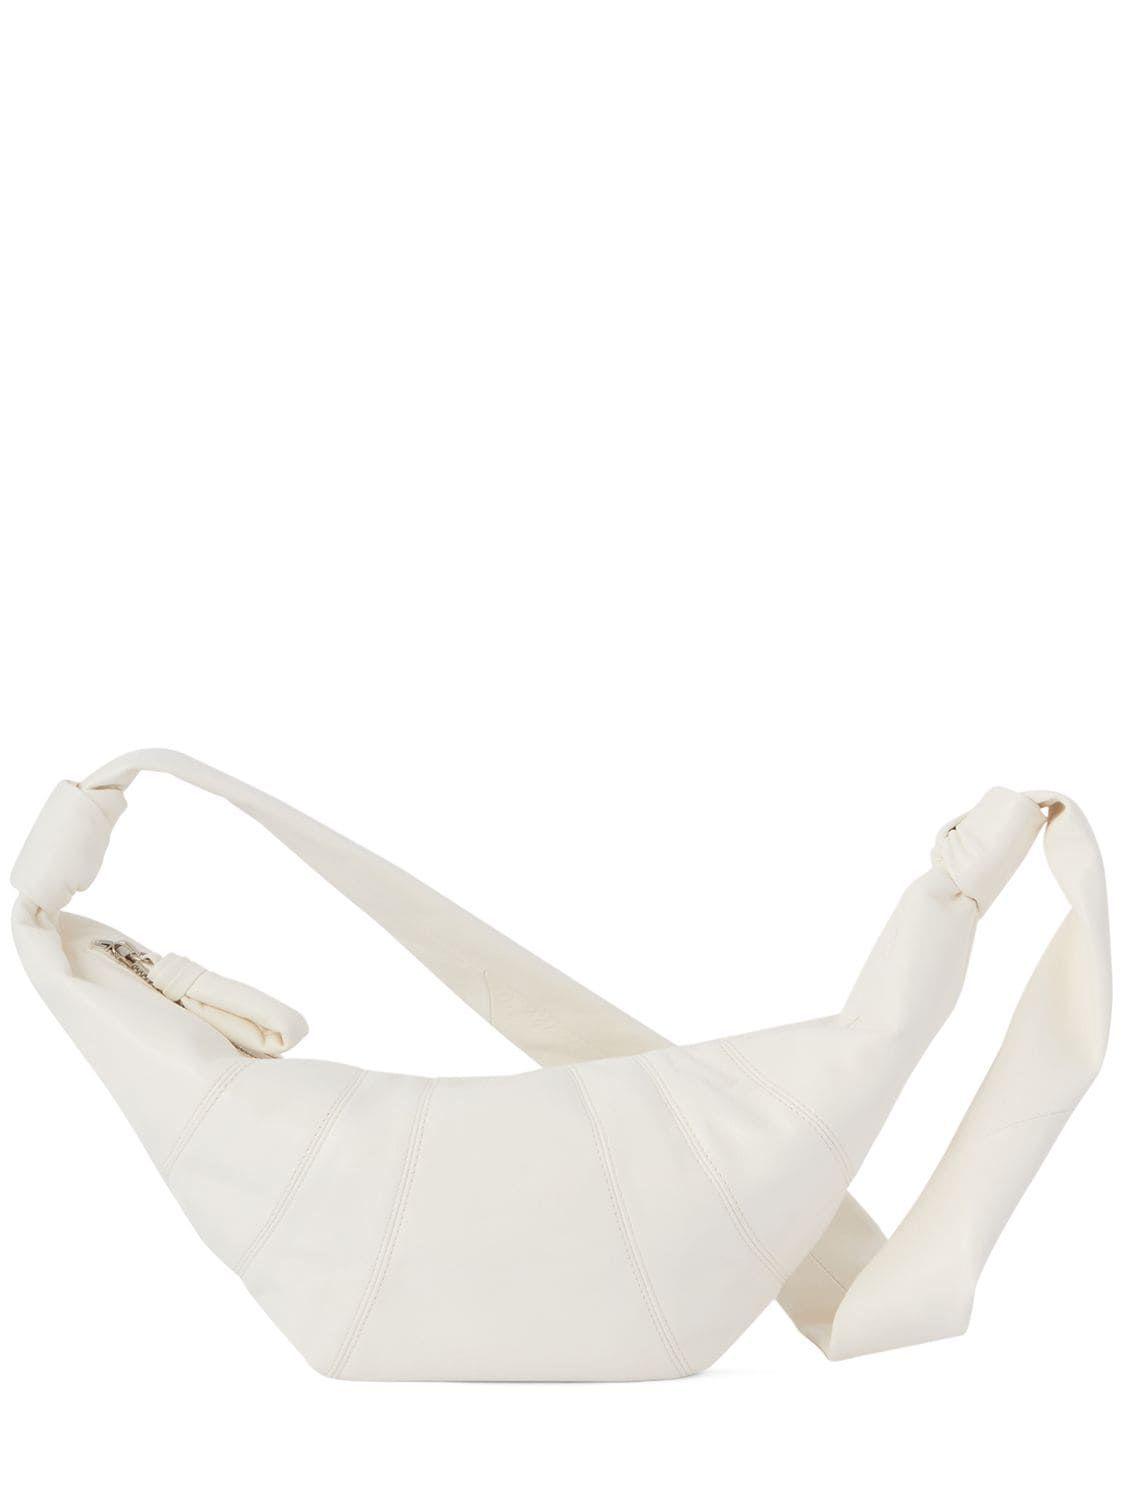 Lemaire Medium Croissant Soft Nappa Bag in Natural | Lyst